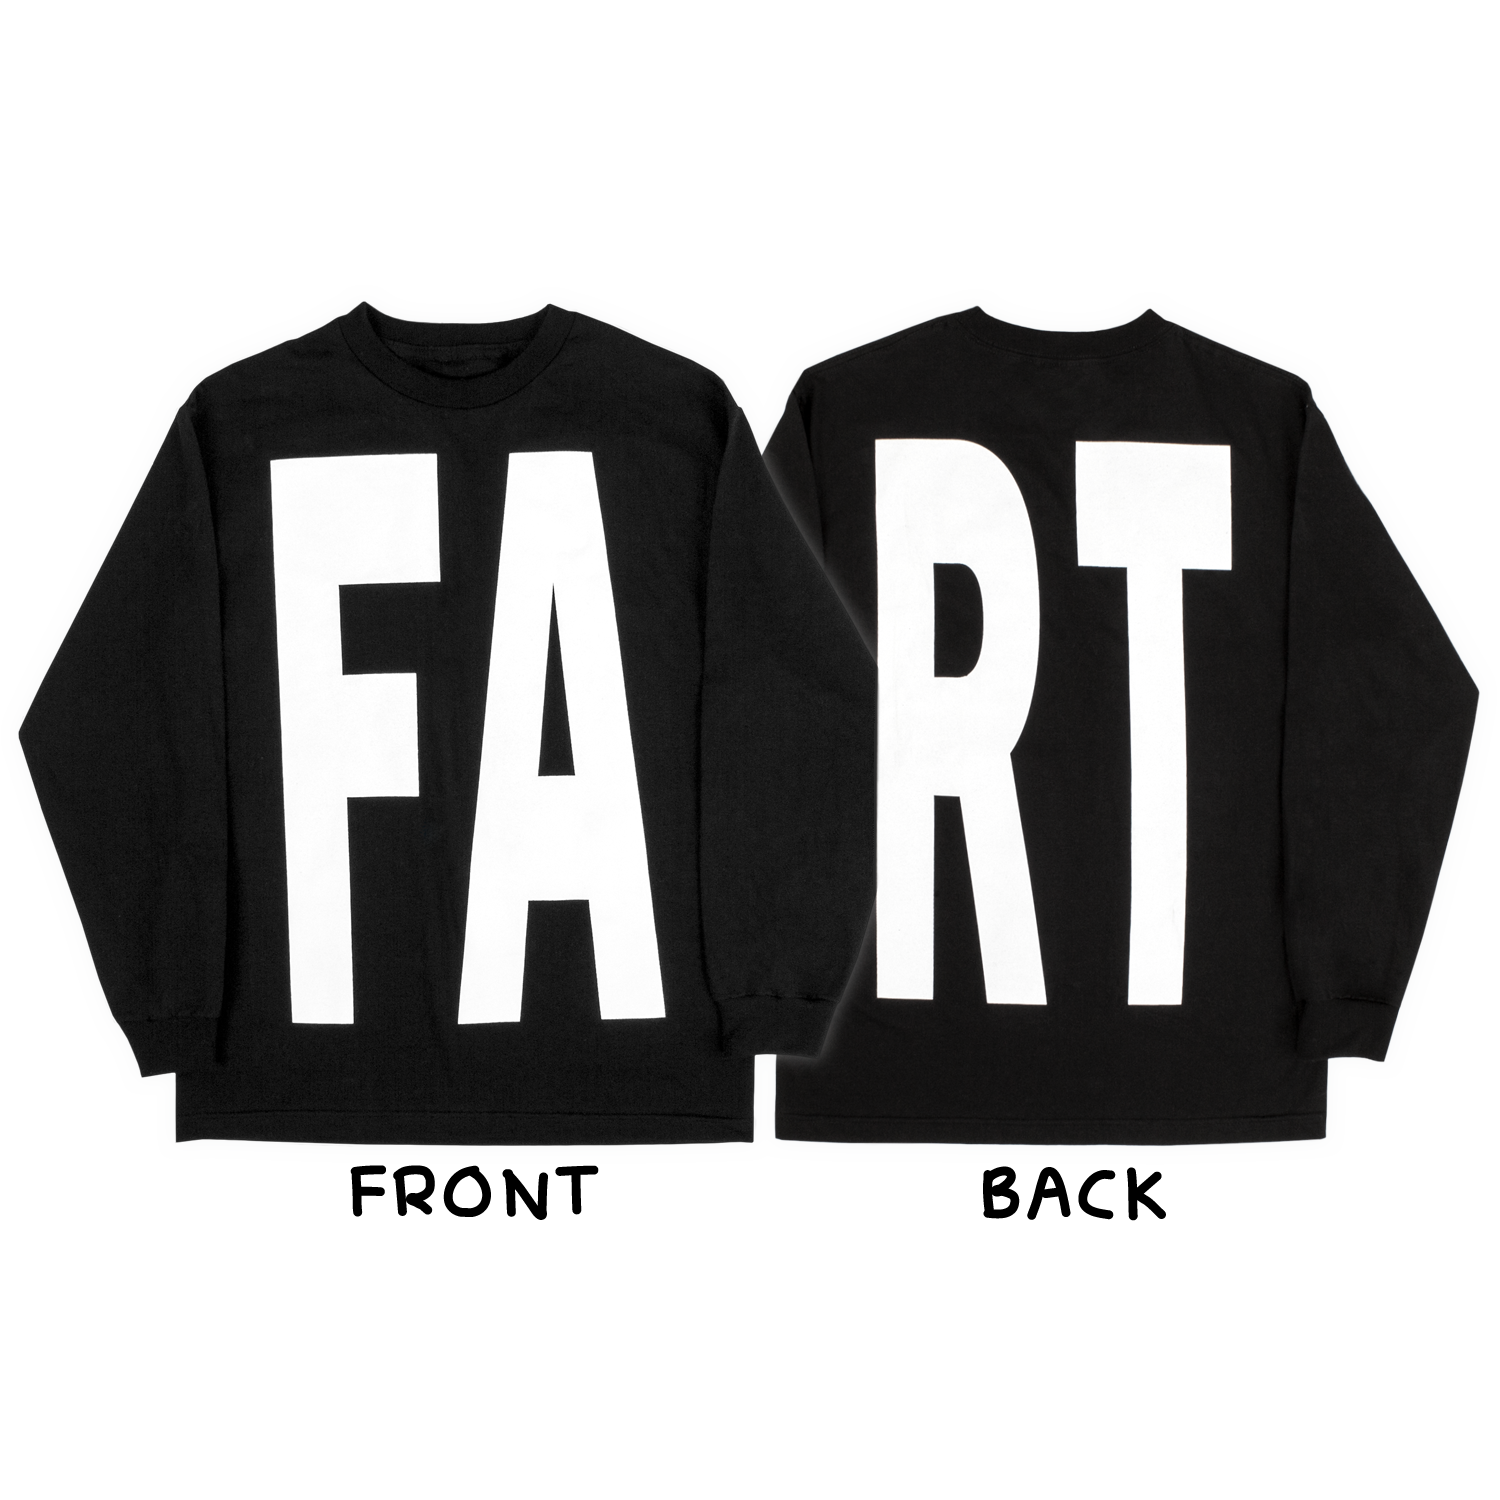 FART by Pizzaslime & The Fat Jew Long Sleeve Shirt